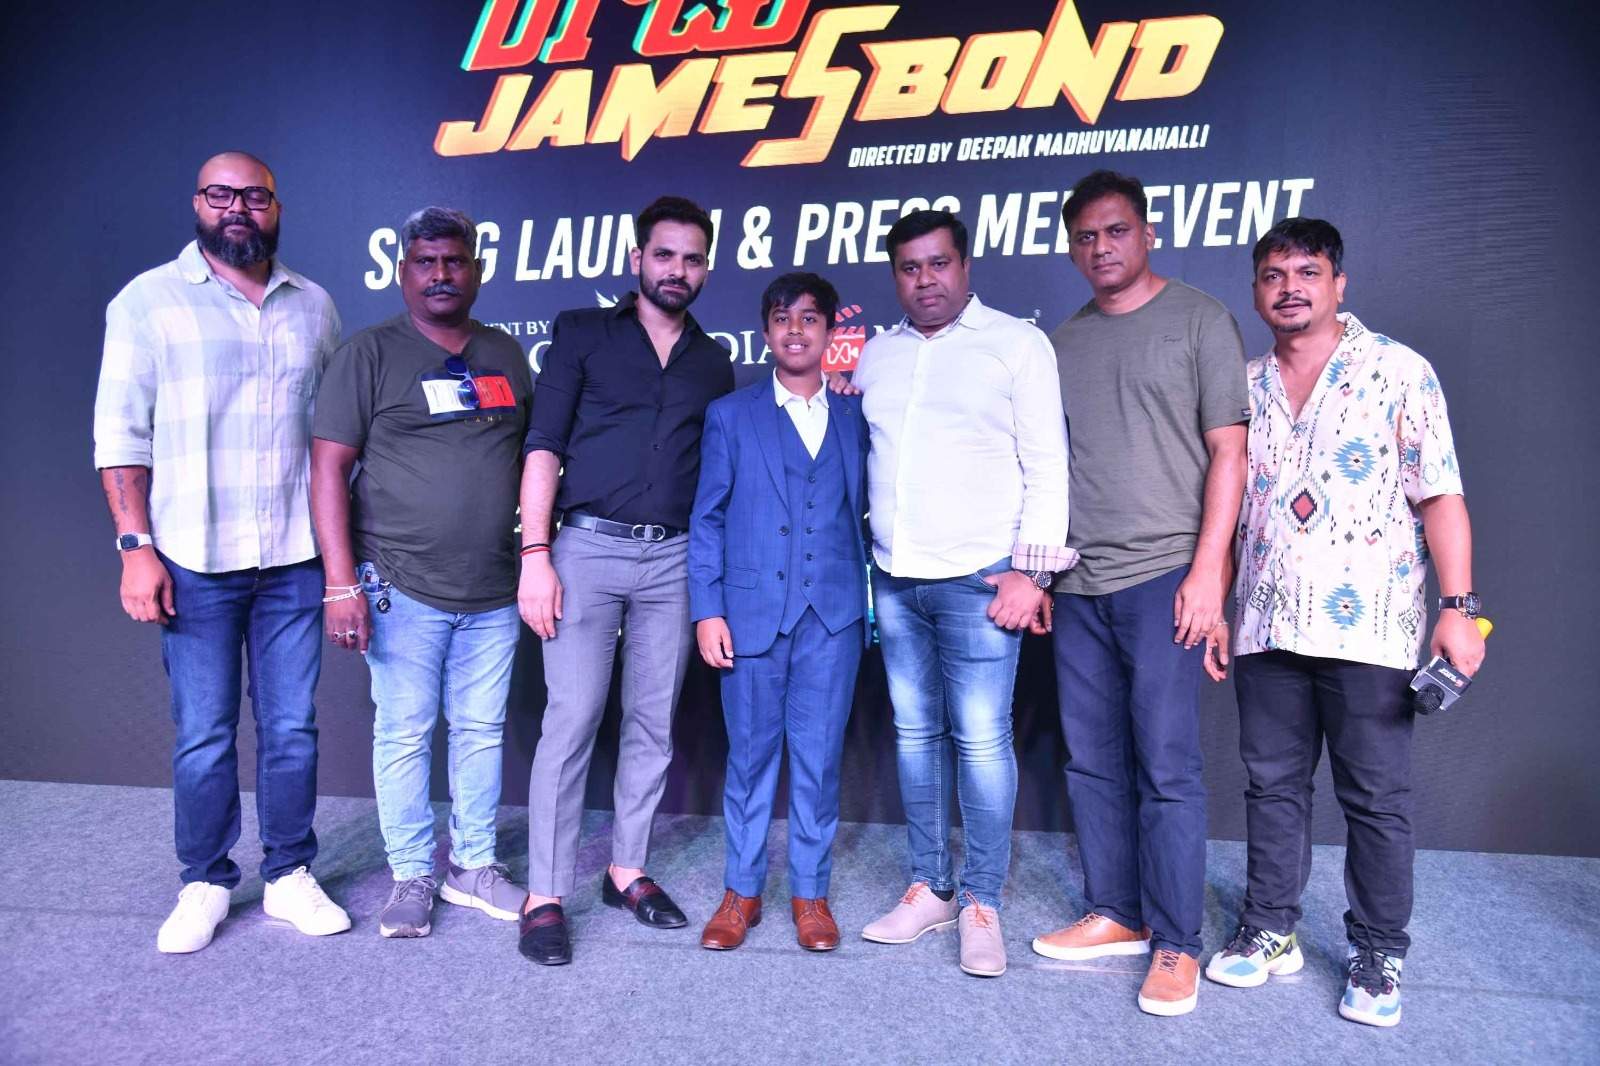 Raju James Bond aiming for an August release